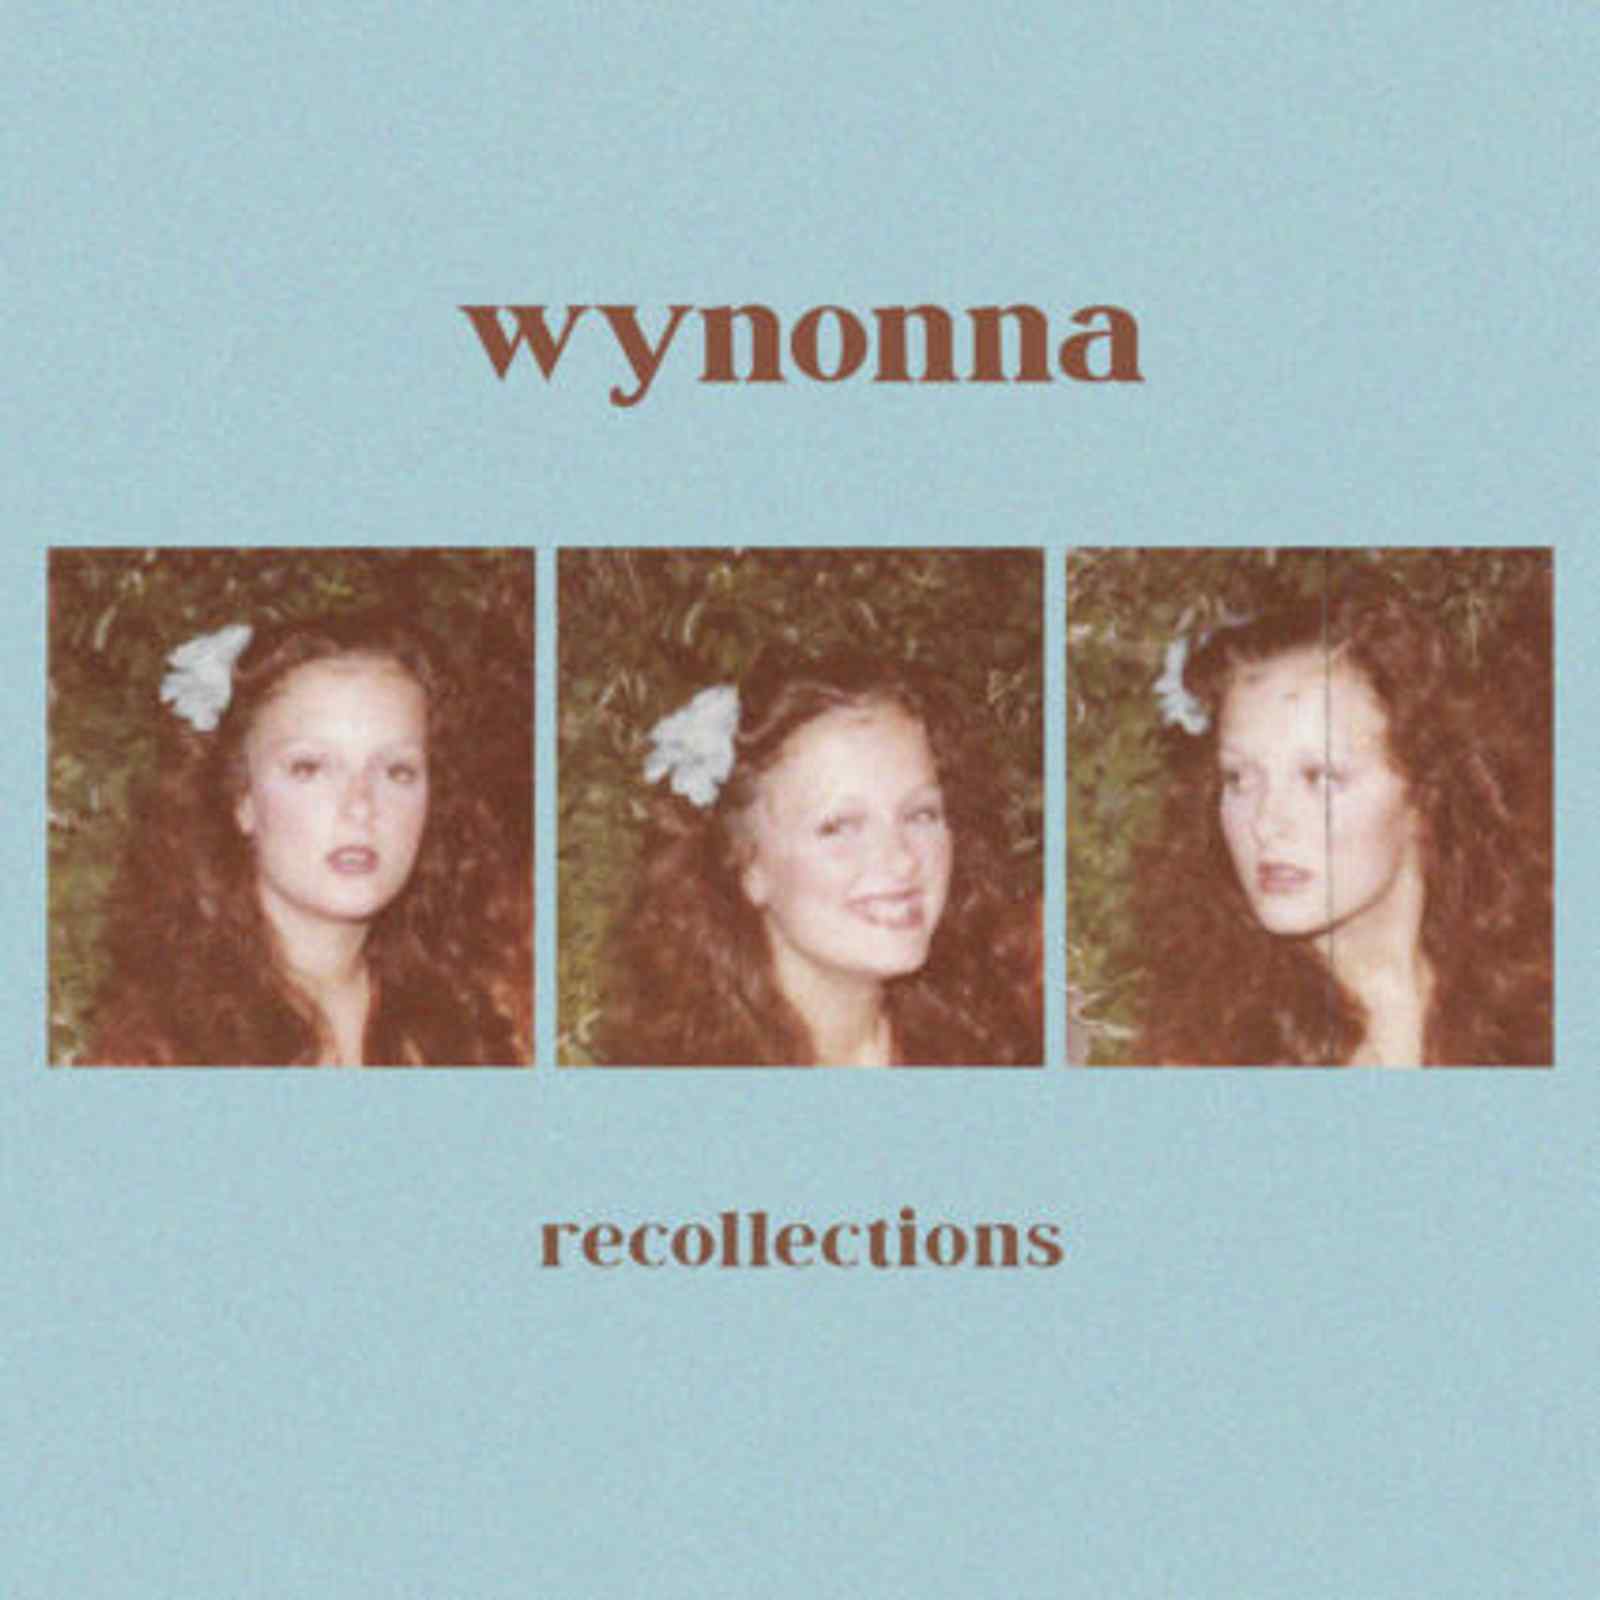 Recollections by Wynonna